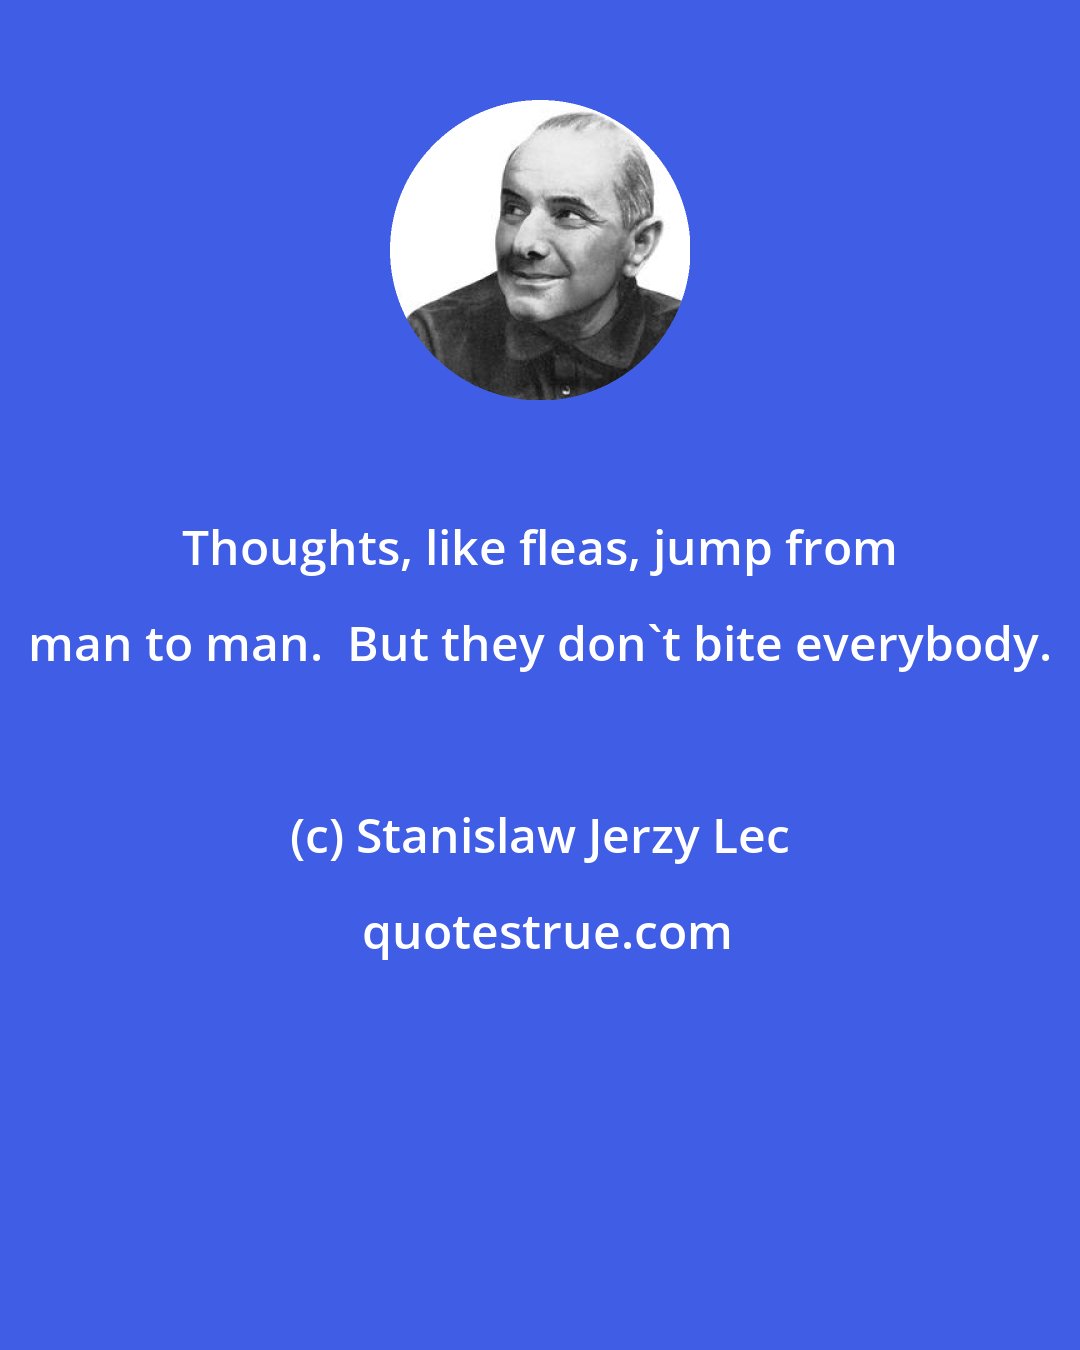 Stanislaw Jerzy Lec: Thoughts, like fleas, jump from man to man.  But they don't bite everybody.